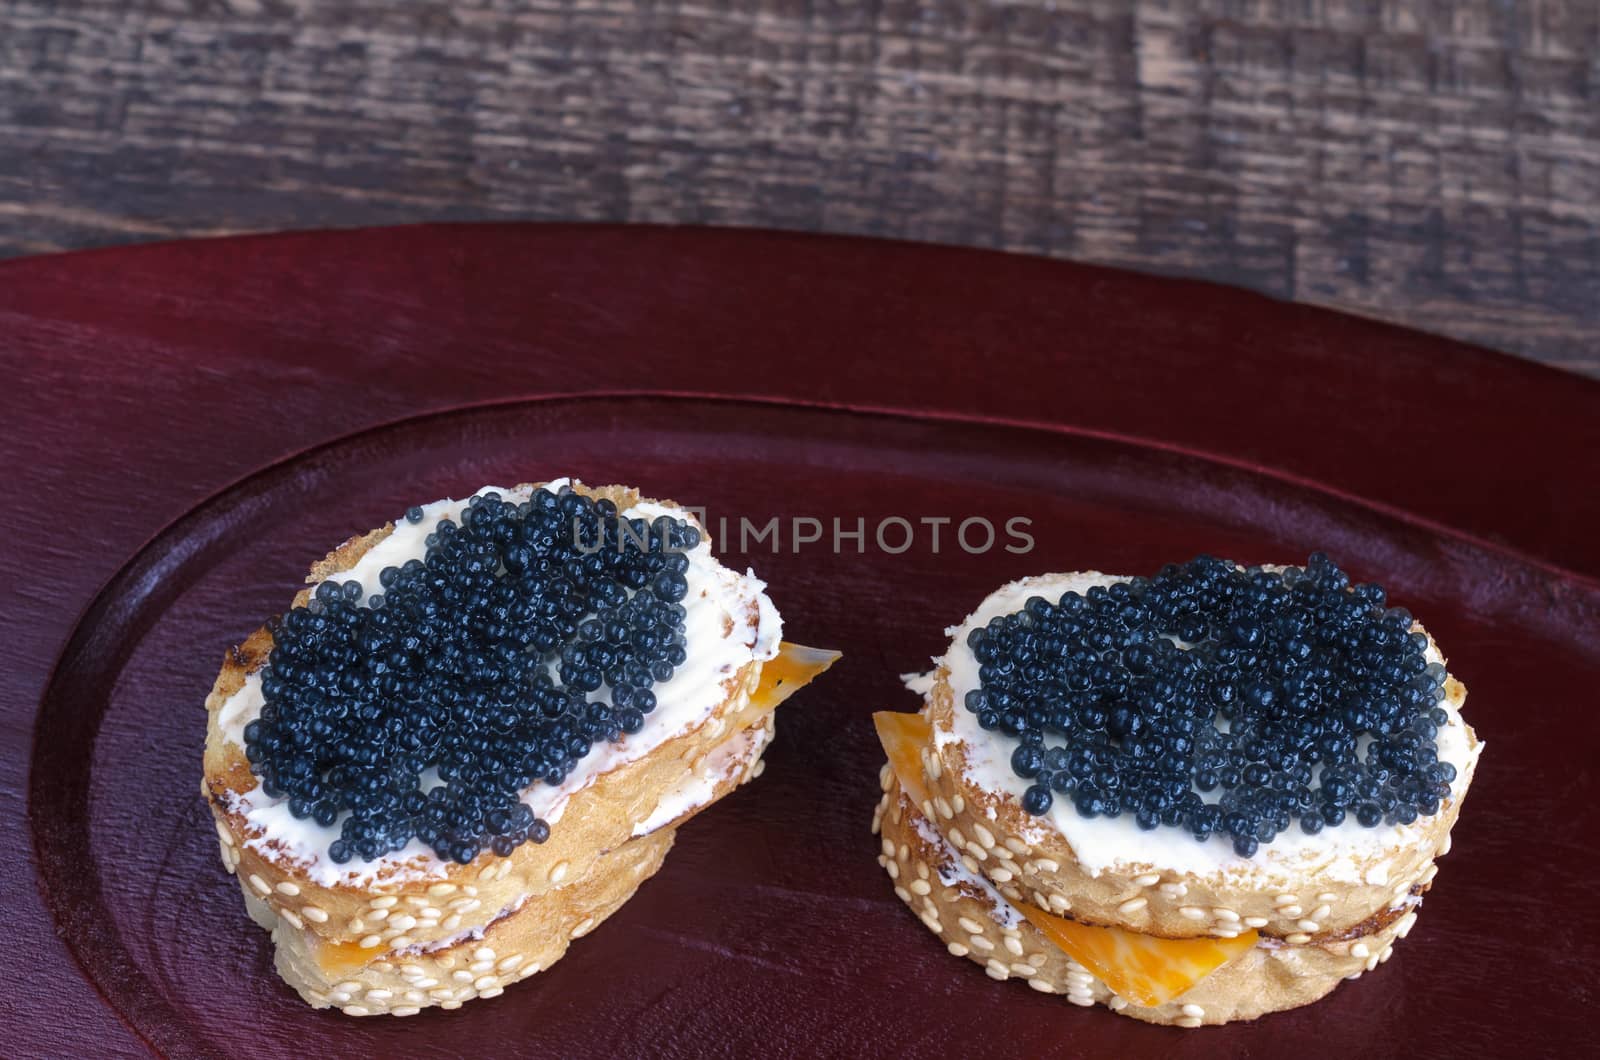 Sandwiches with black caviar on a wooden tray. by Gaina